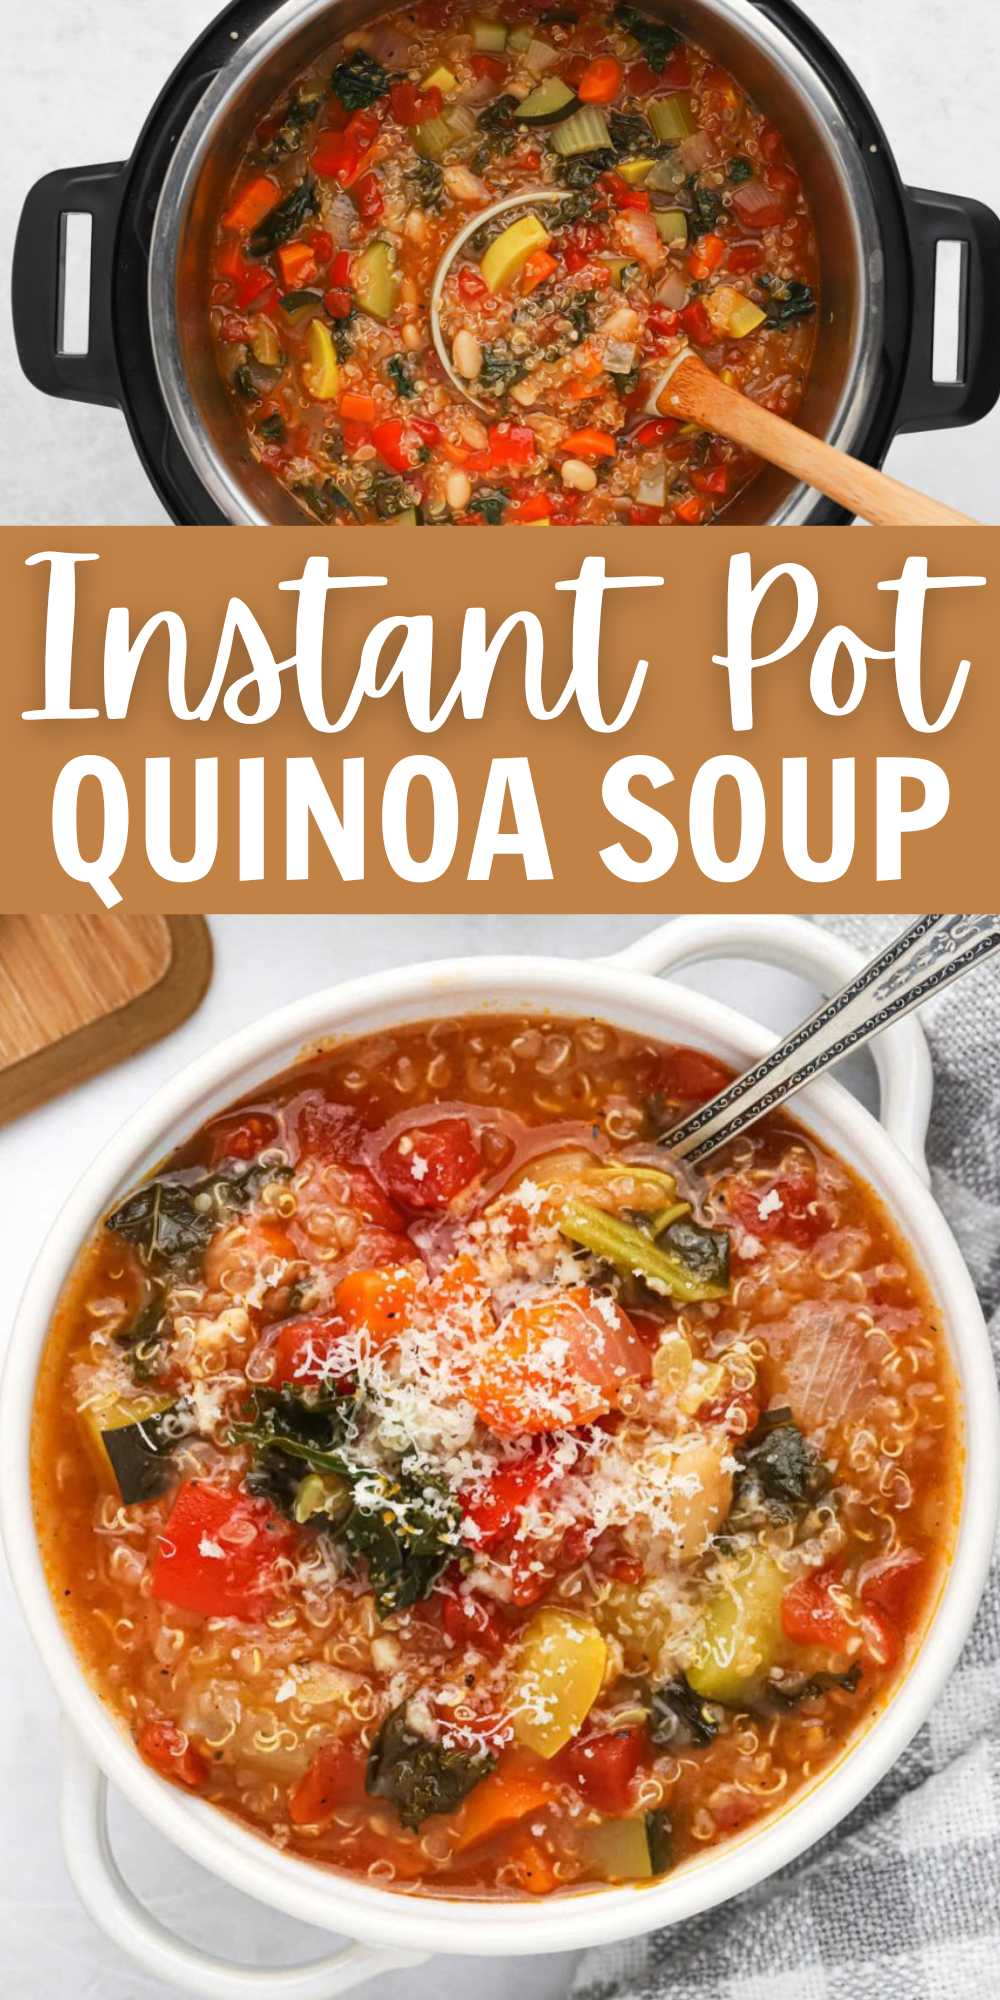 Get dinner on the table in under 5 minutes with this easy Instant Pot Quinoa Soup Recipe. Loaded with veggies and quinoa, this soup is tasty. Easy vegetable soup that is simple to make in the pressure cooker. #eatingonadime #pressurecooker #quinoasoup